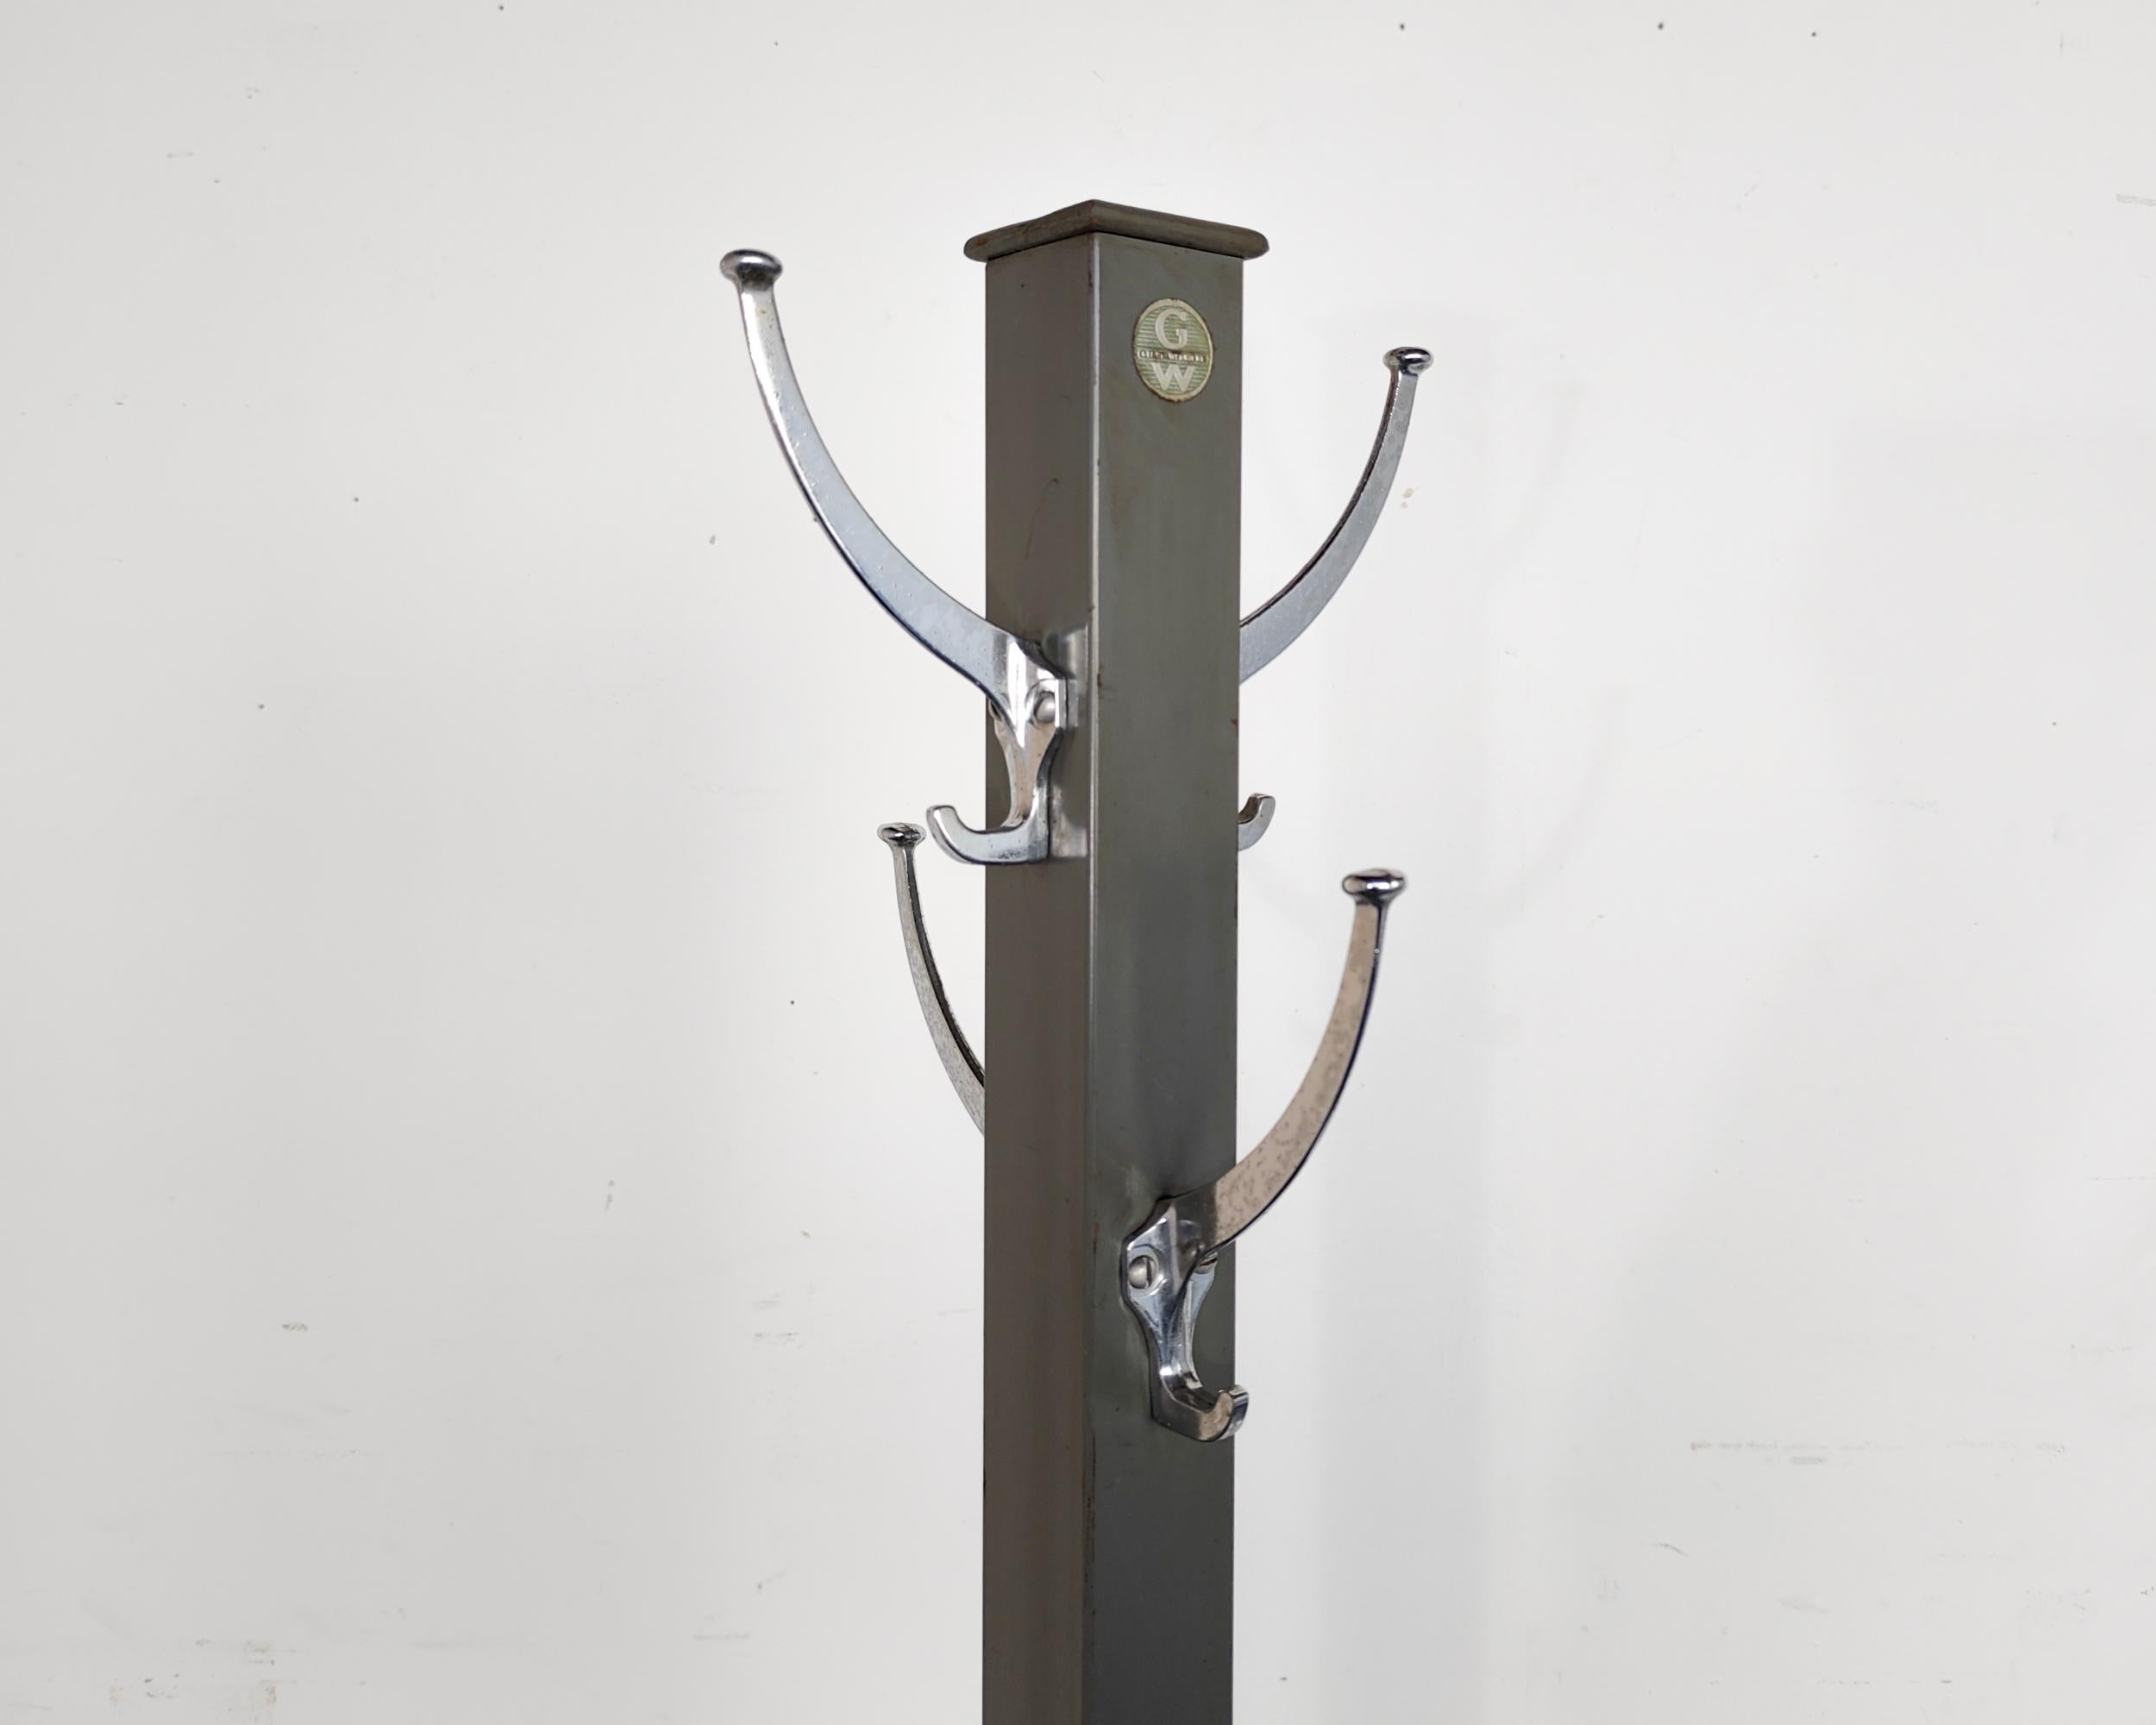 Midcentury Classic Industrial freestanding coat + hat stand. manufactured by Americas leading maker if Industrial and commercial furniture, Globe Wernicke. Enameled gray post and X-base and four chrome hooks. Original label still intact. Overall